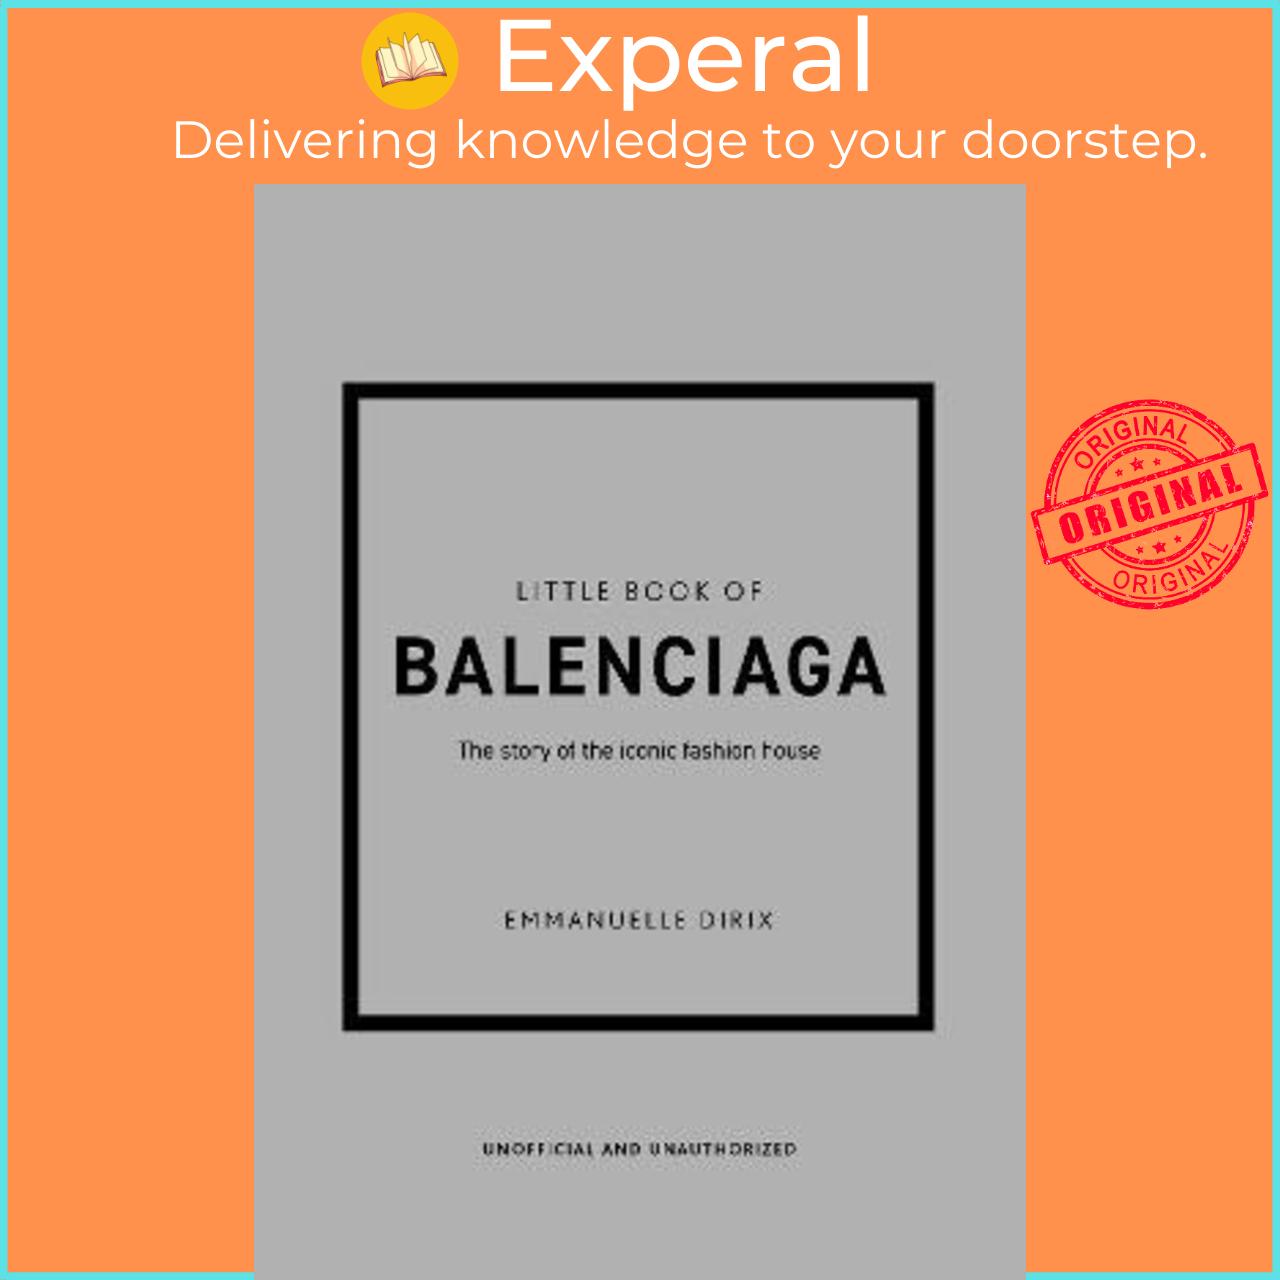 Sách - Little Book of Balenciaga : The Story of the Iconic Fashion House by Emmanuelle Dirix (UK edition, hardcover)